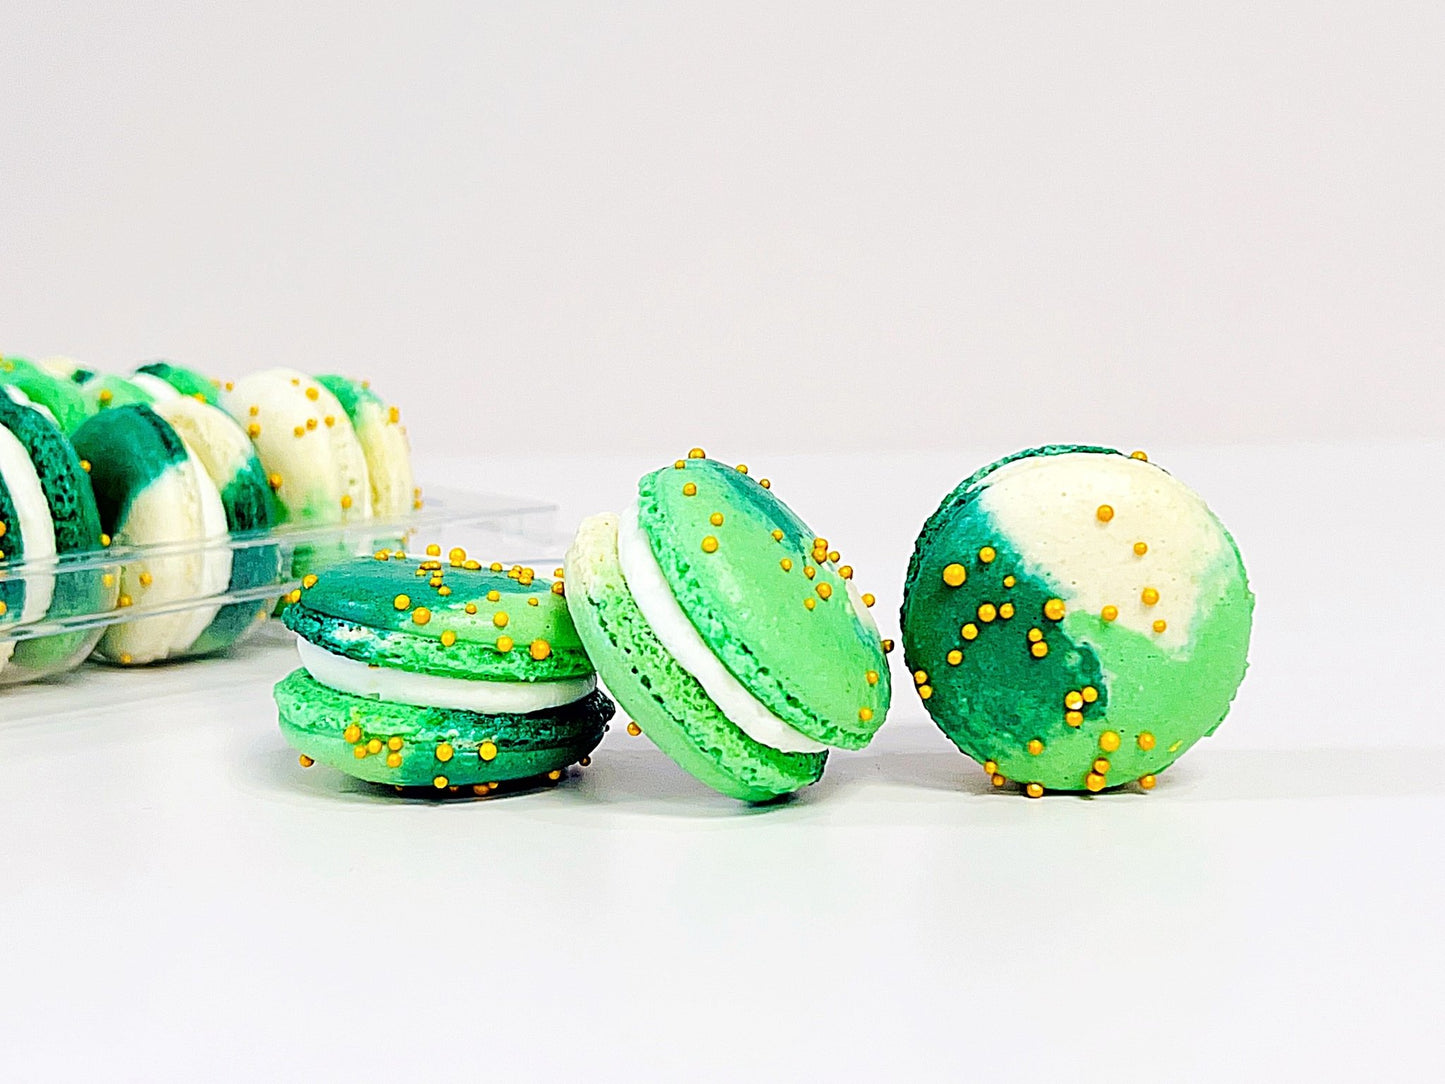 6 Pack Mojito Minty French Macaron - Macaron Centrale